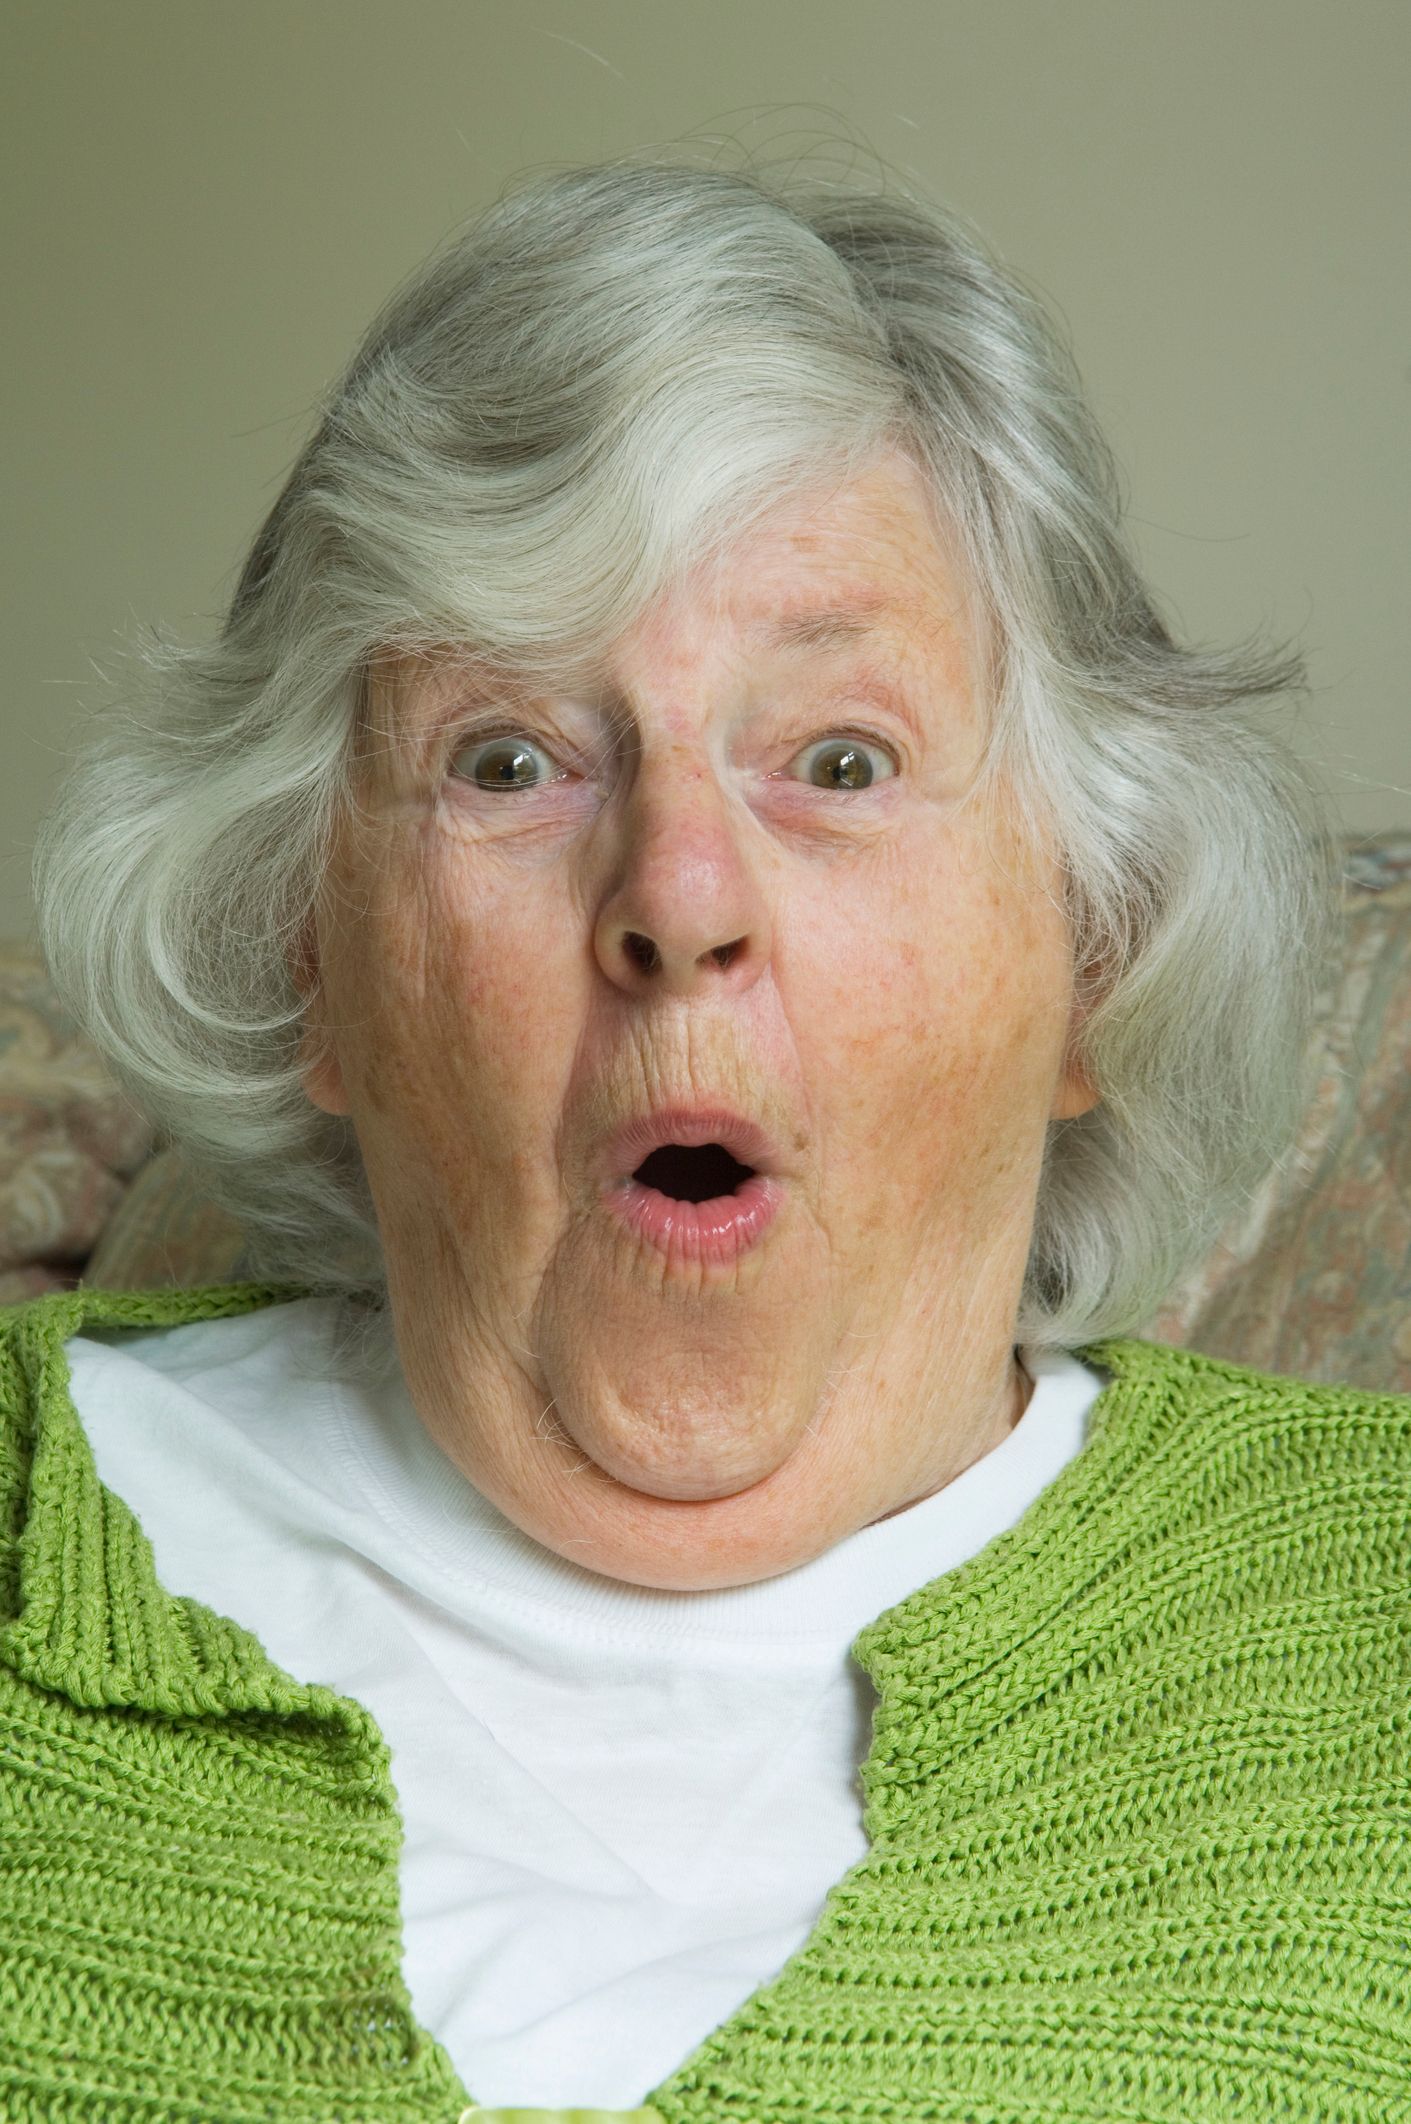 A shocked grandmother. | Source: Getty Images